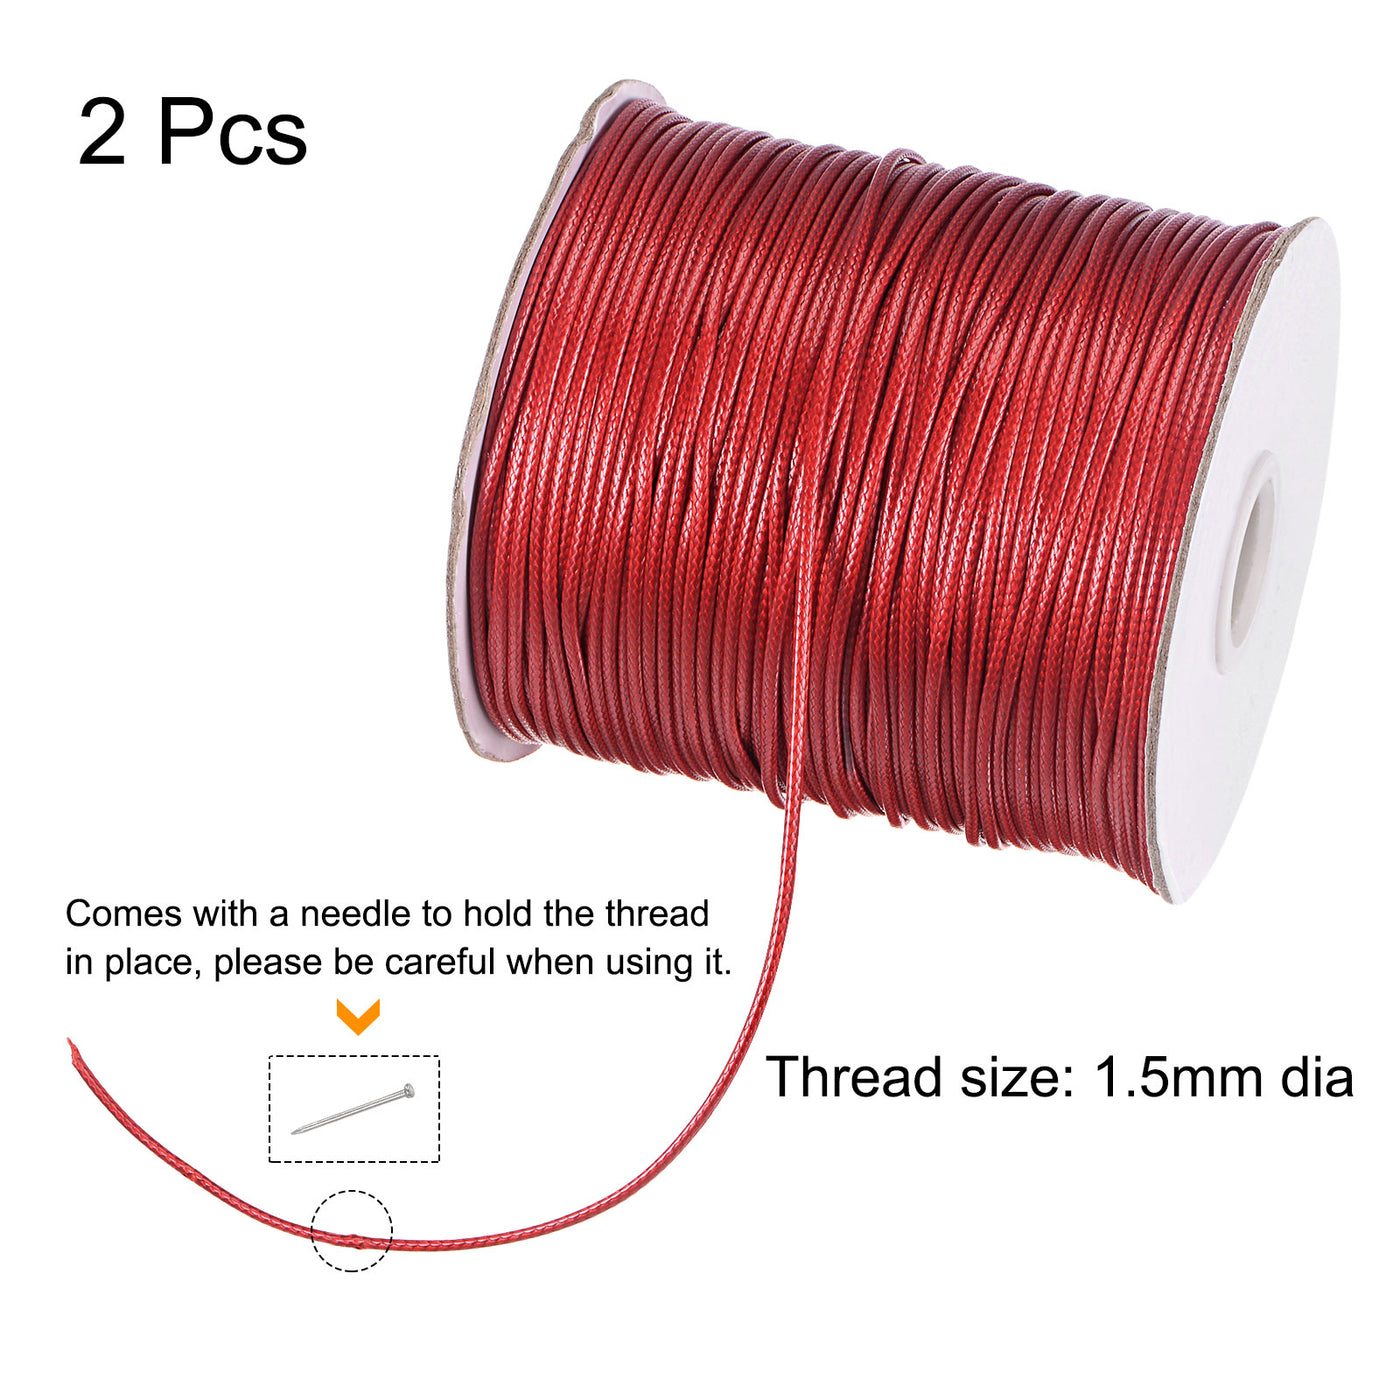 uxcell Uxcell 2pcs 1.5mm Waxed Polyester String 158M 172-Yard Beading Crafting Rope, Wine Red